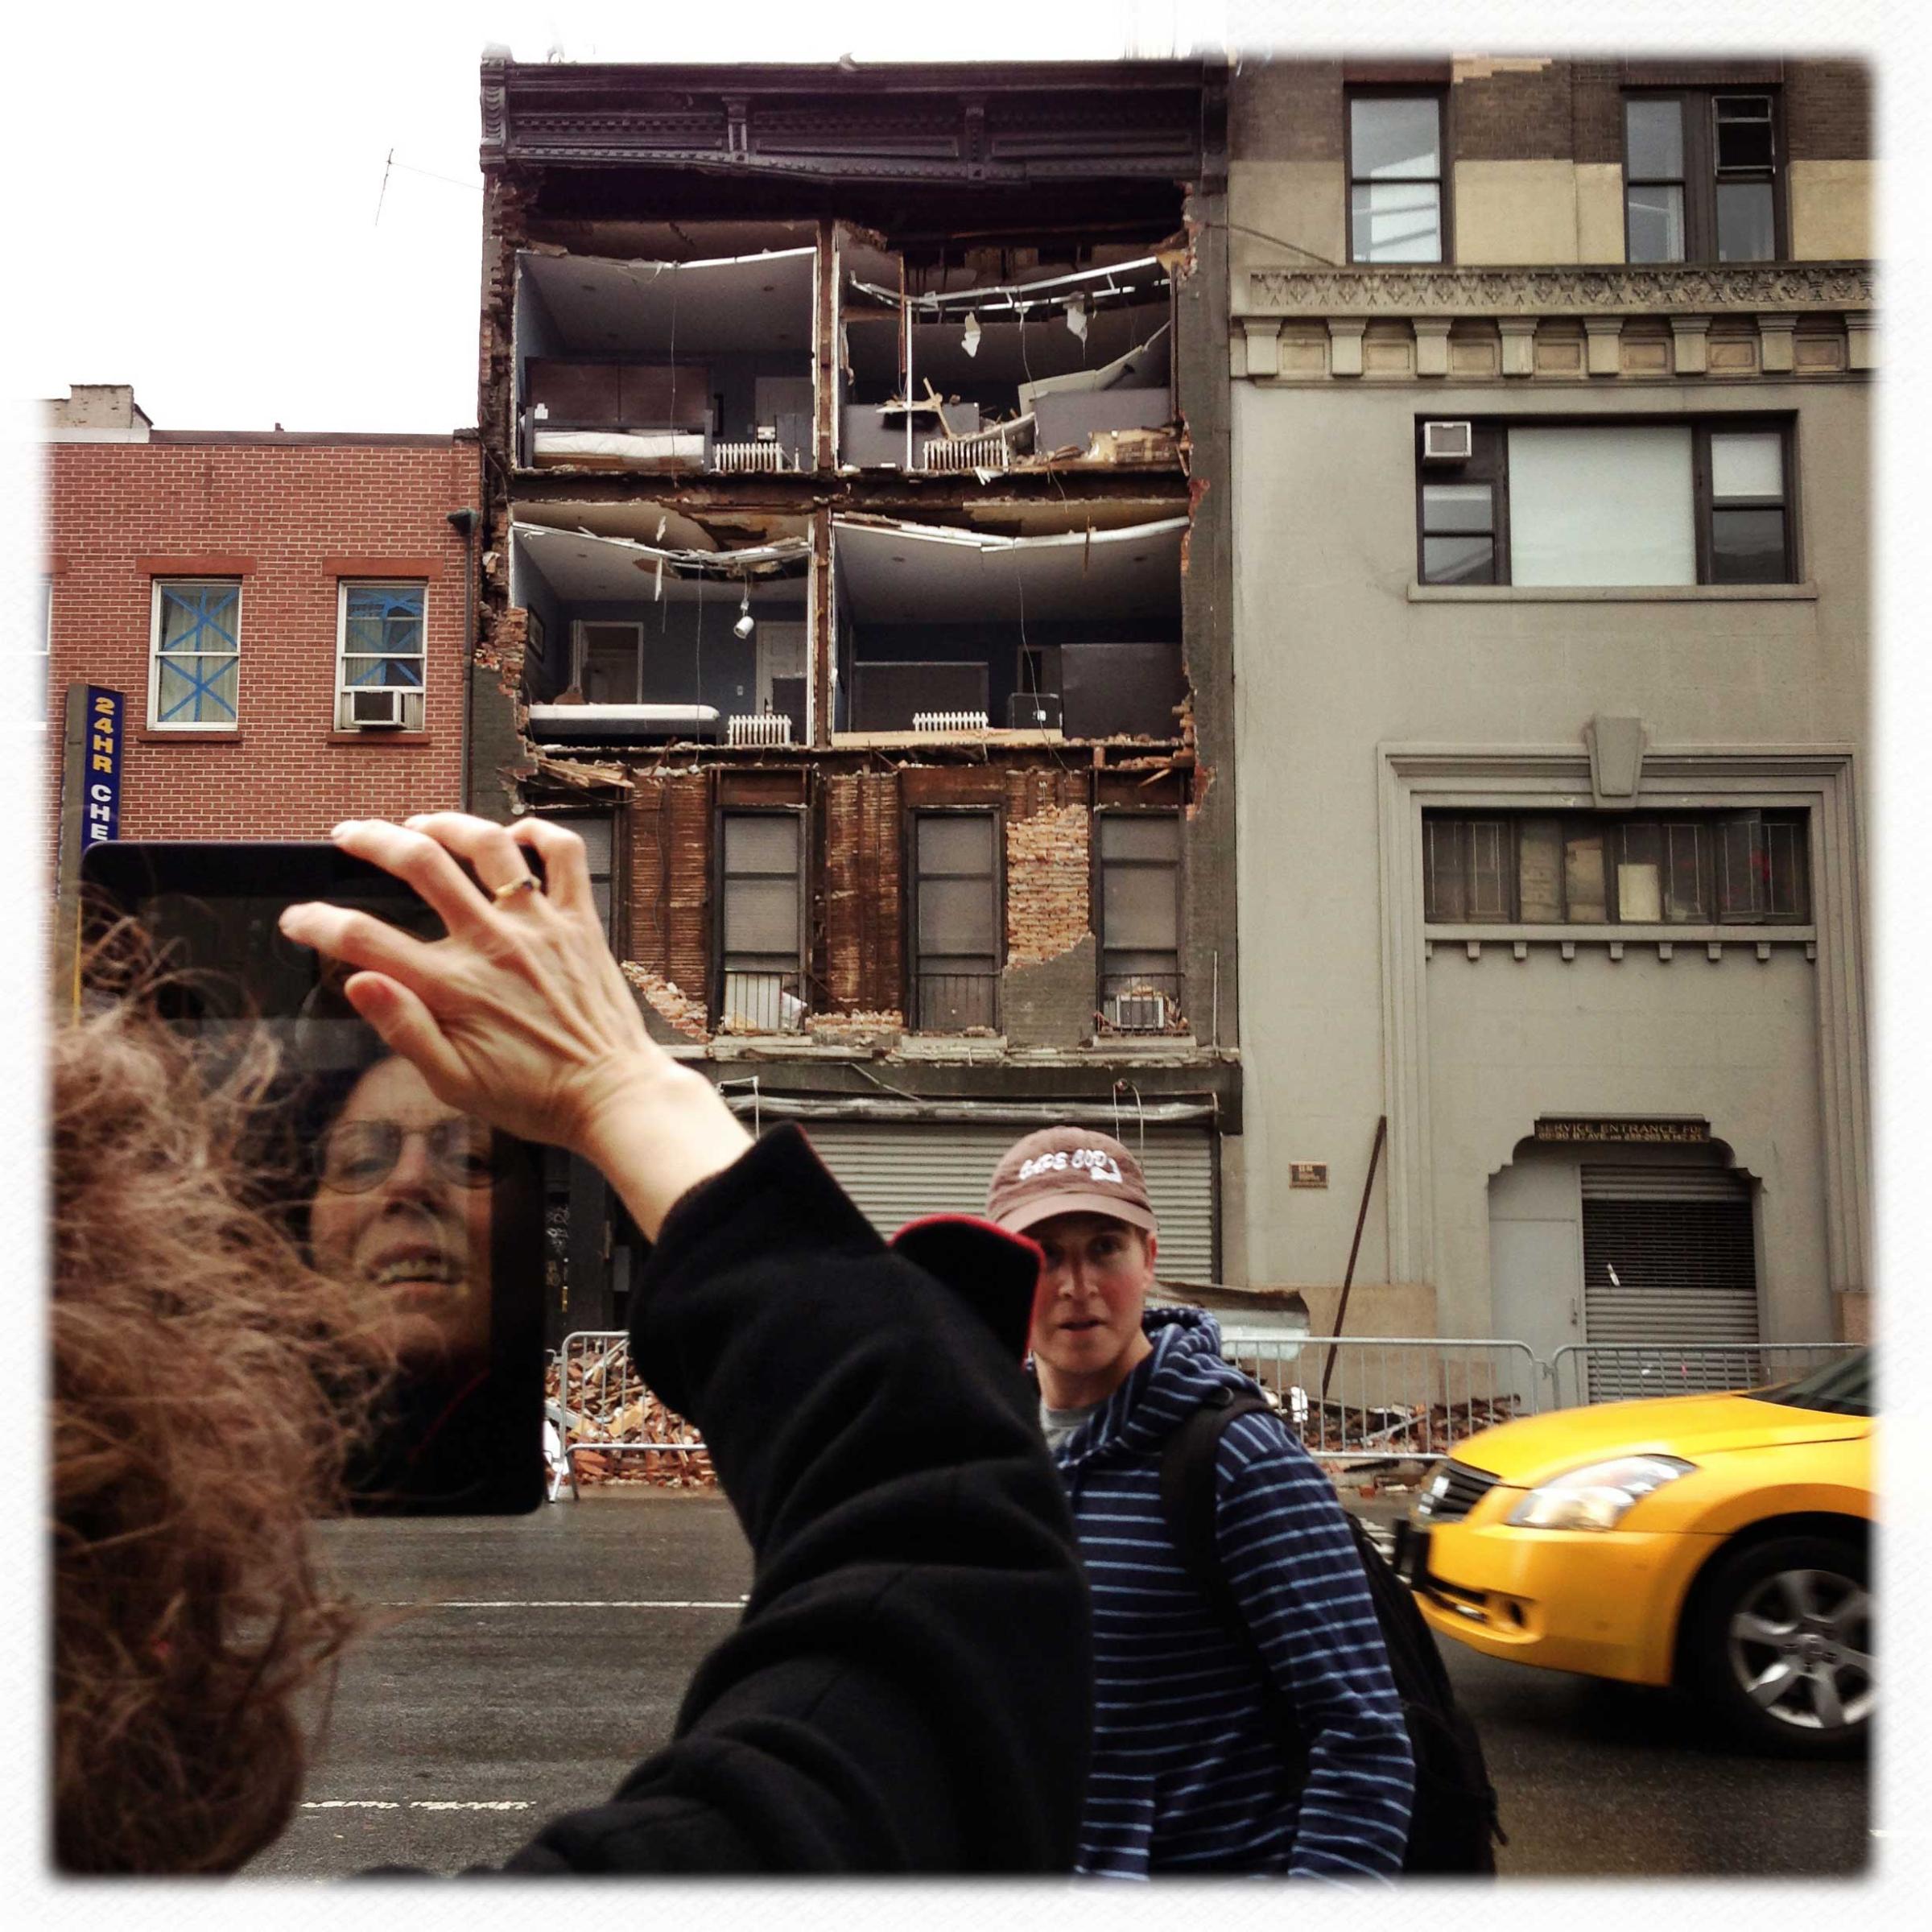 A woman uses an iPad to photograph exposed bedrooms inside a building with a collapsed facade on 8th Avenue in Manhattan